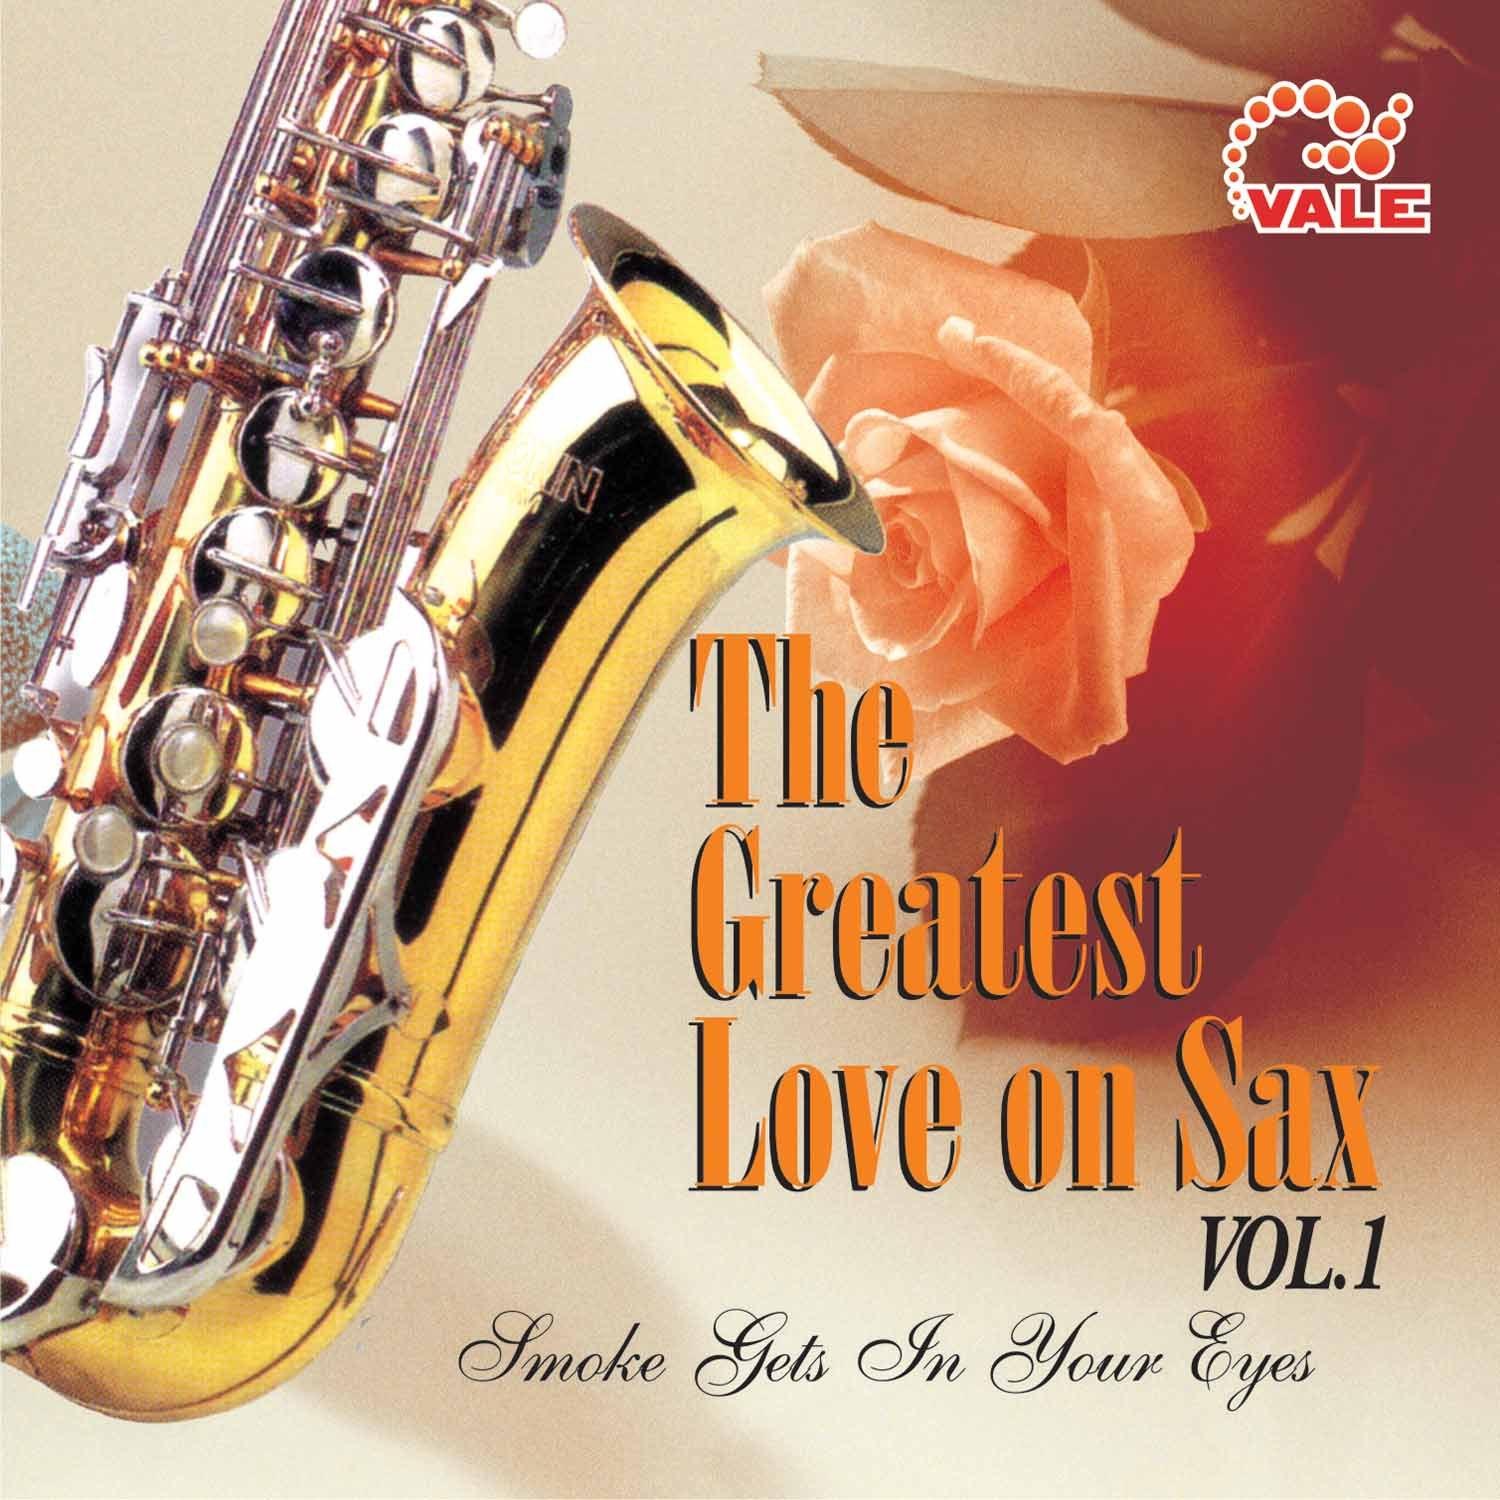 The Greatest Love On Sax, Vol. 1